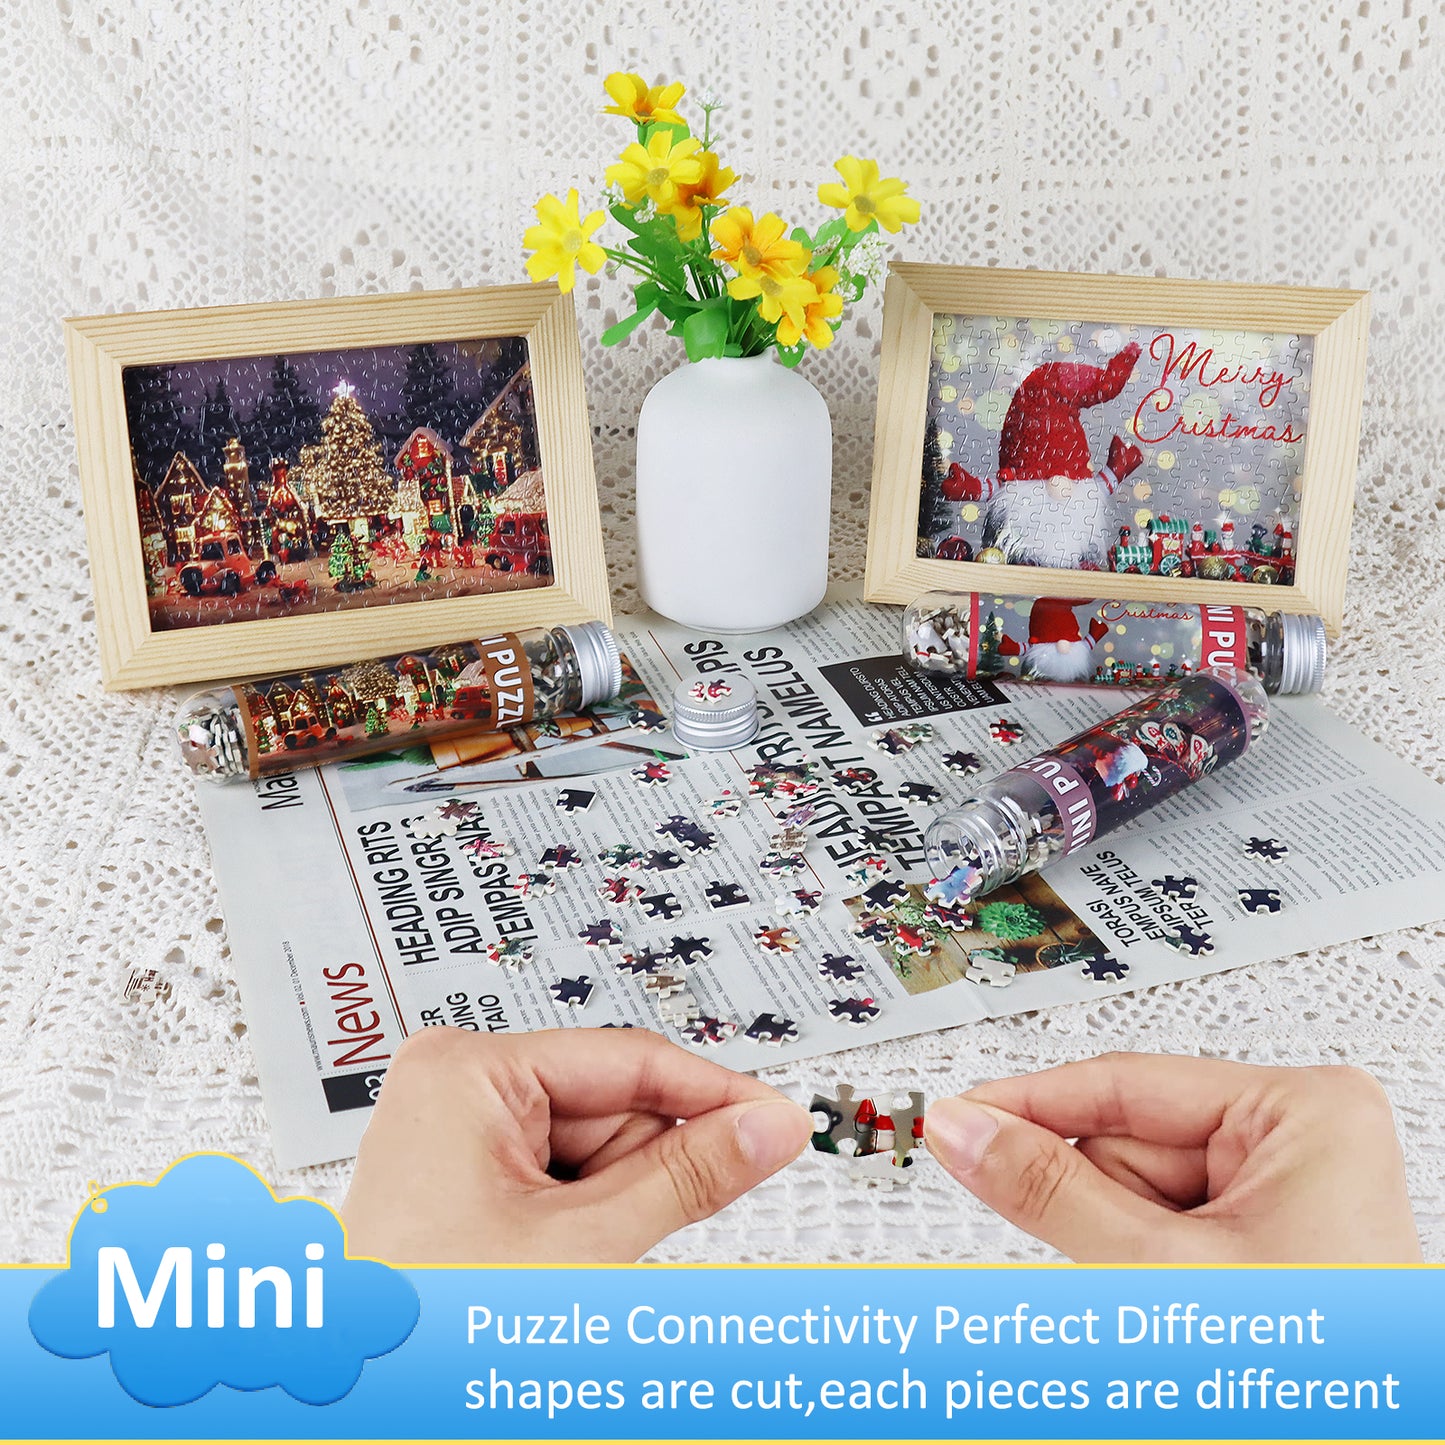 MISITU Mini Puzzle - Christmas- 3 Pack of 150 Pieces Puzzles for Adult 6 x 4 Inches